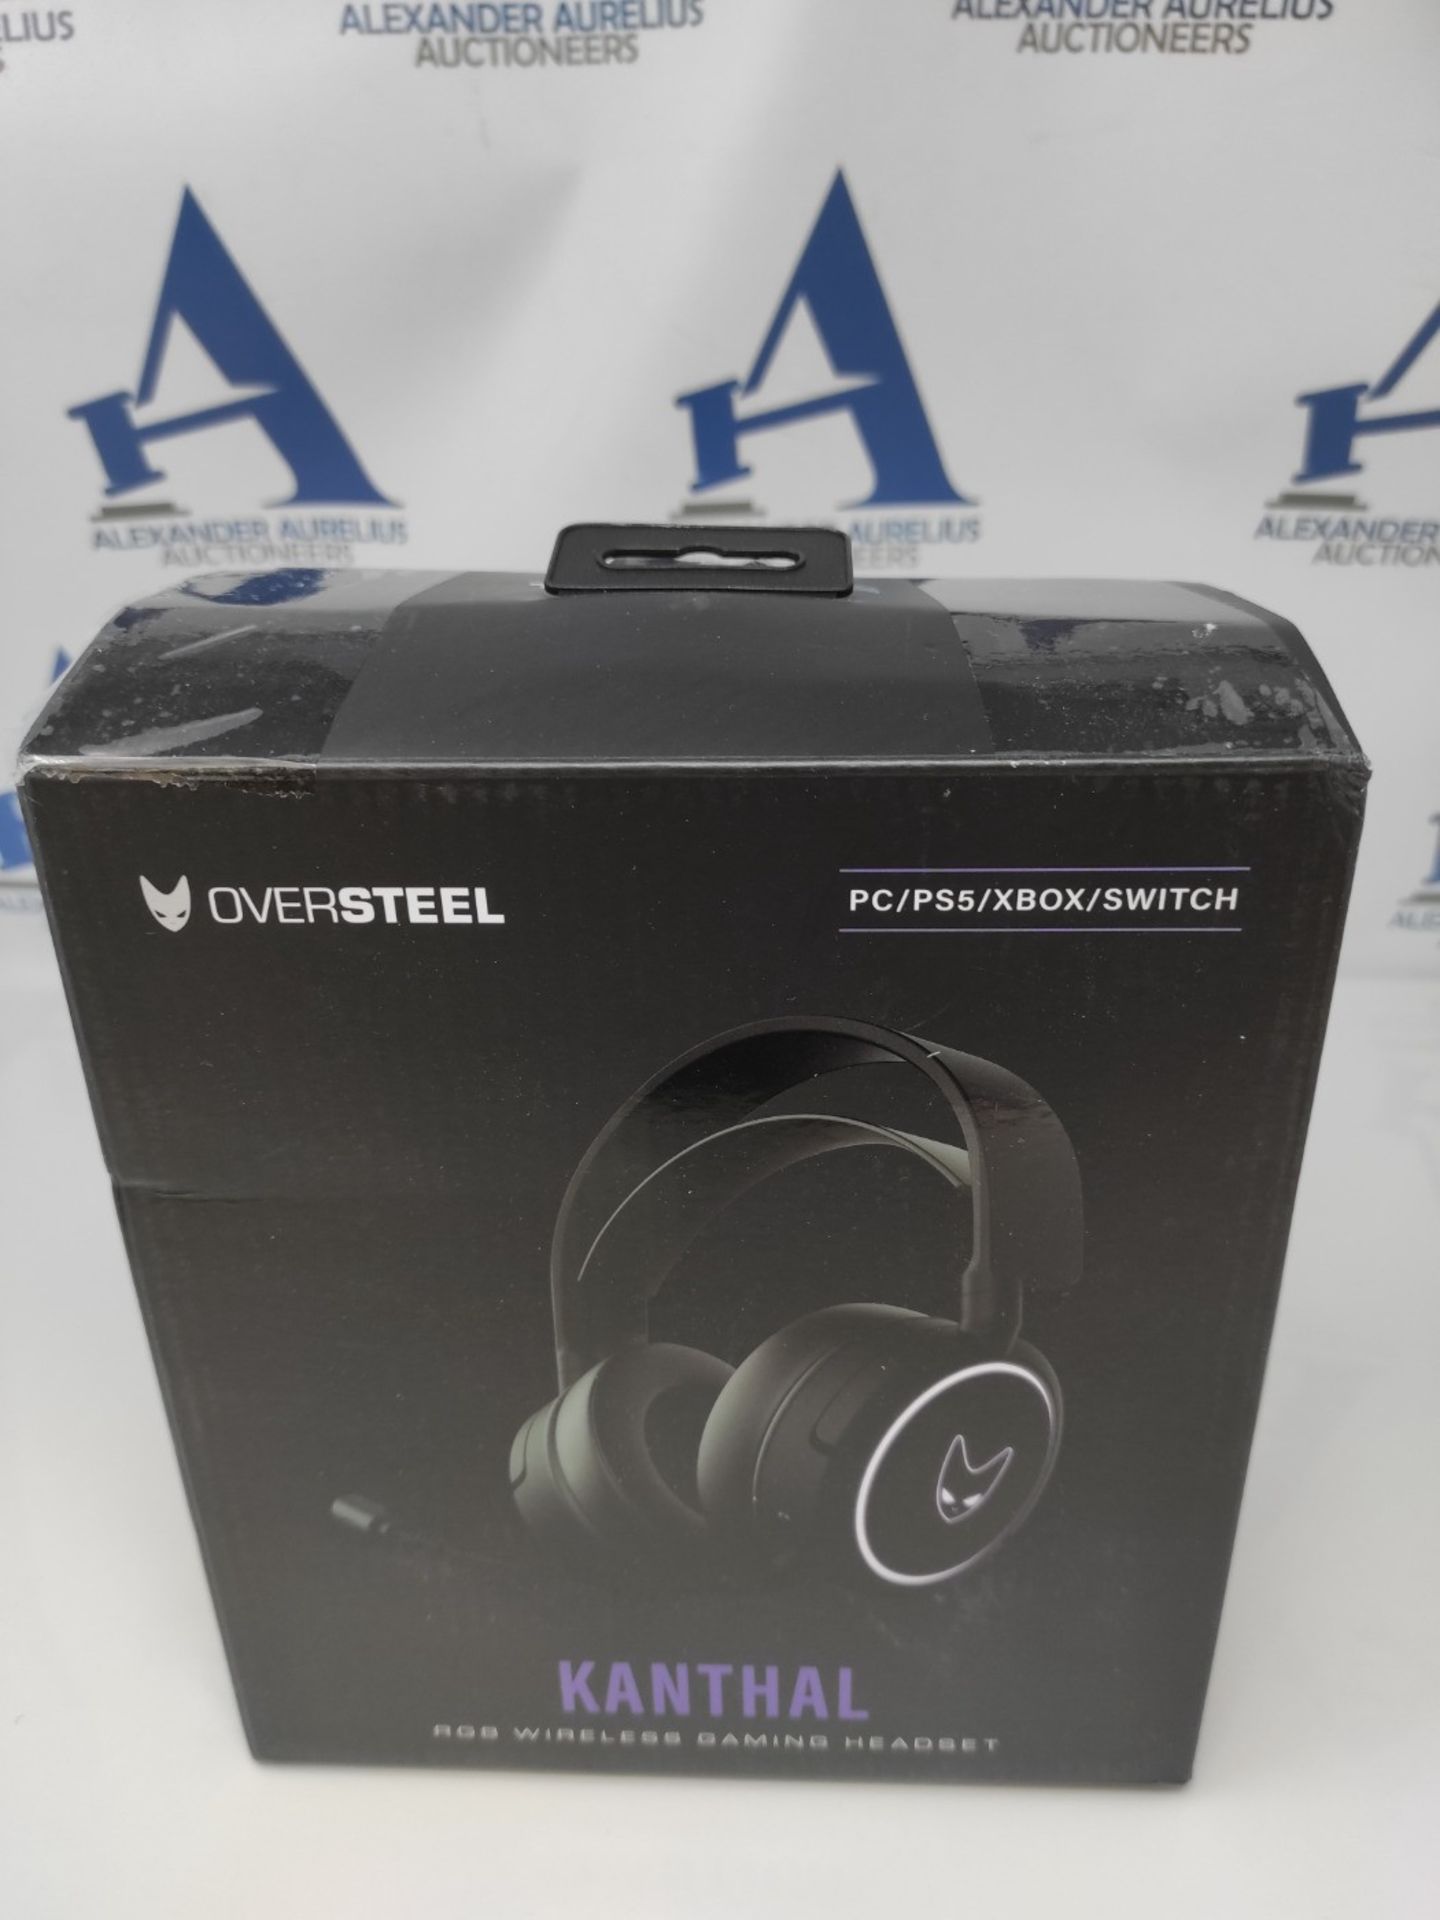 RRP £56.00 Oversteel - Kanthal Wireless Gaming Headset 7.1, built-in microphone, 20-hour battery - Image 2 of 3